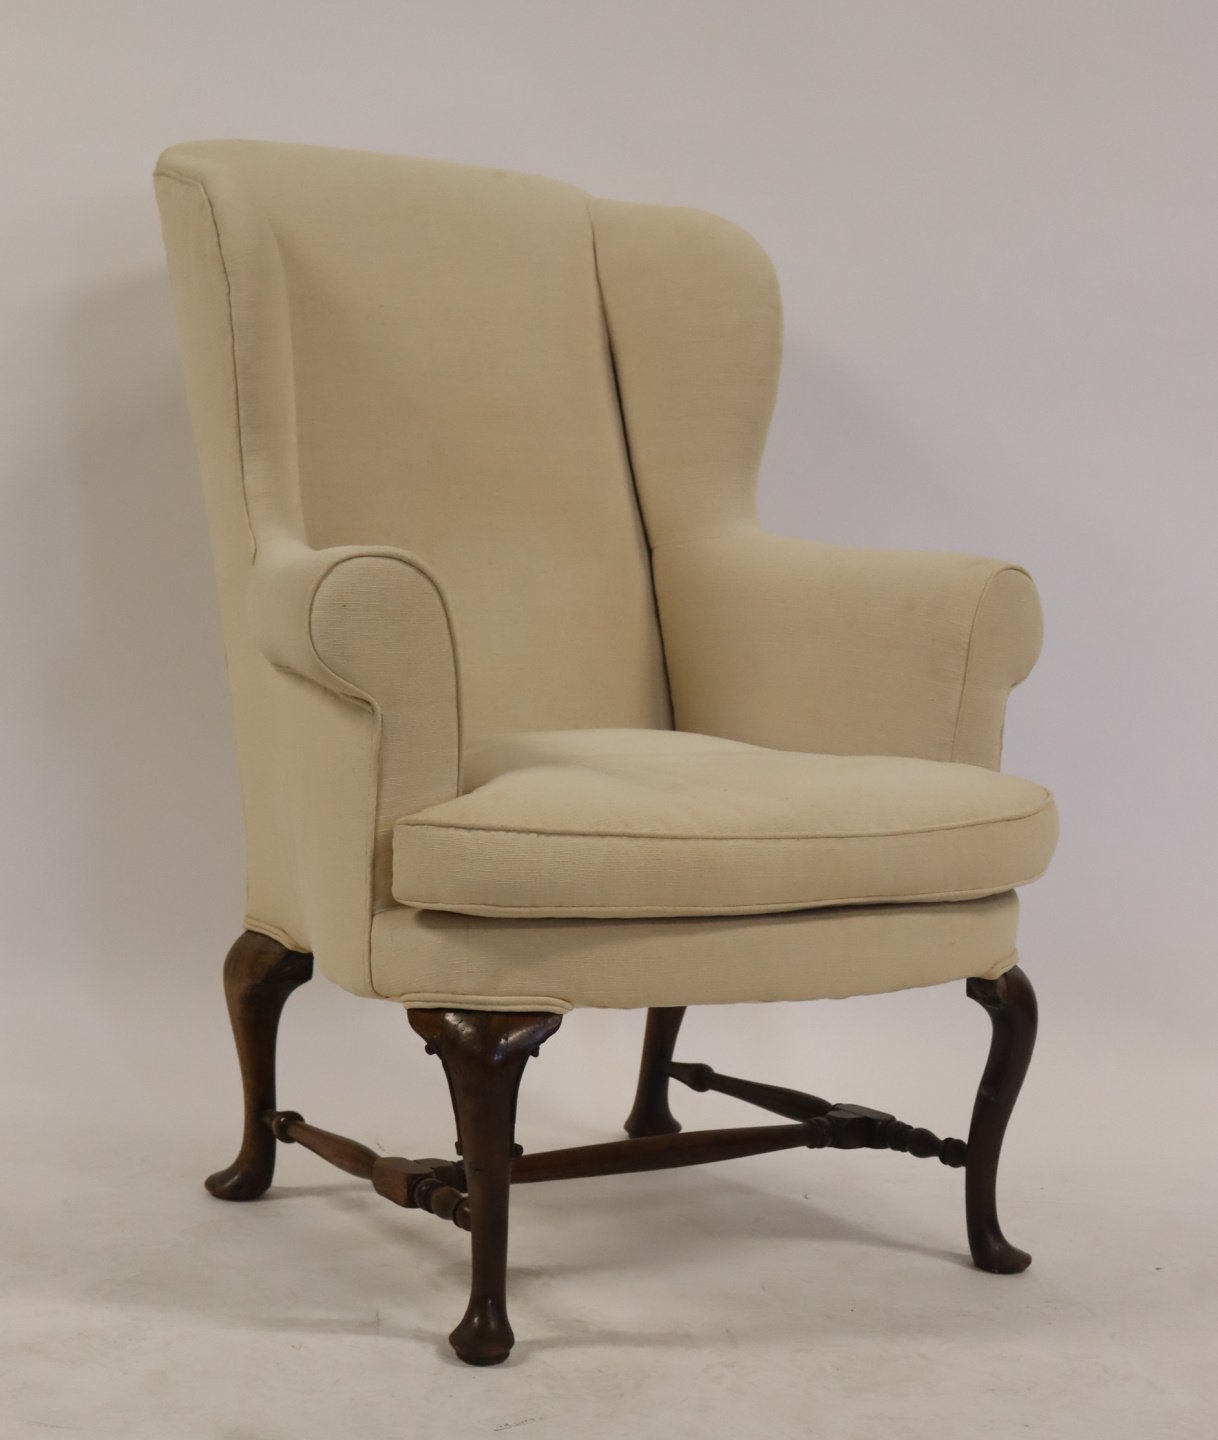 ANTIQUE UPHOLSTERED QUEEN ANNE 3b734d